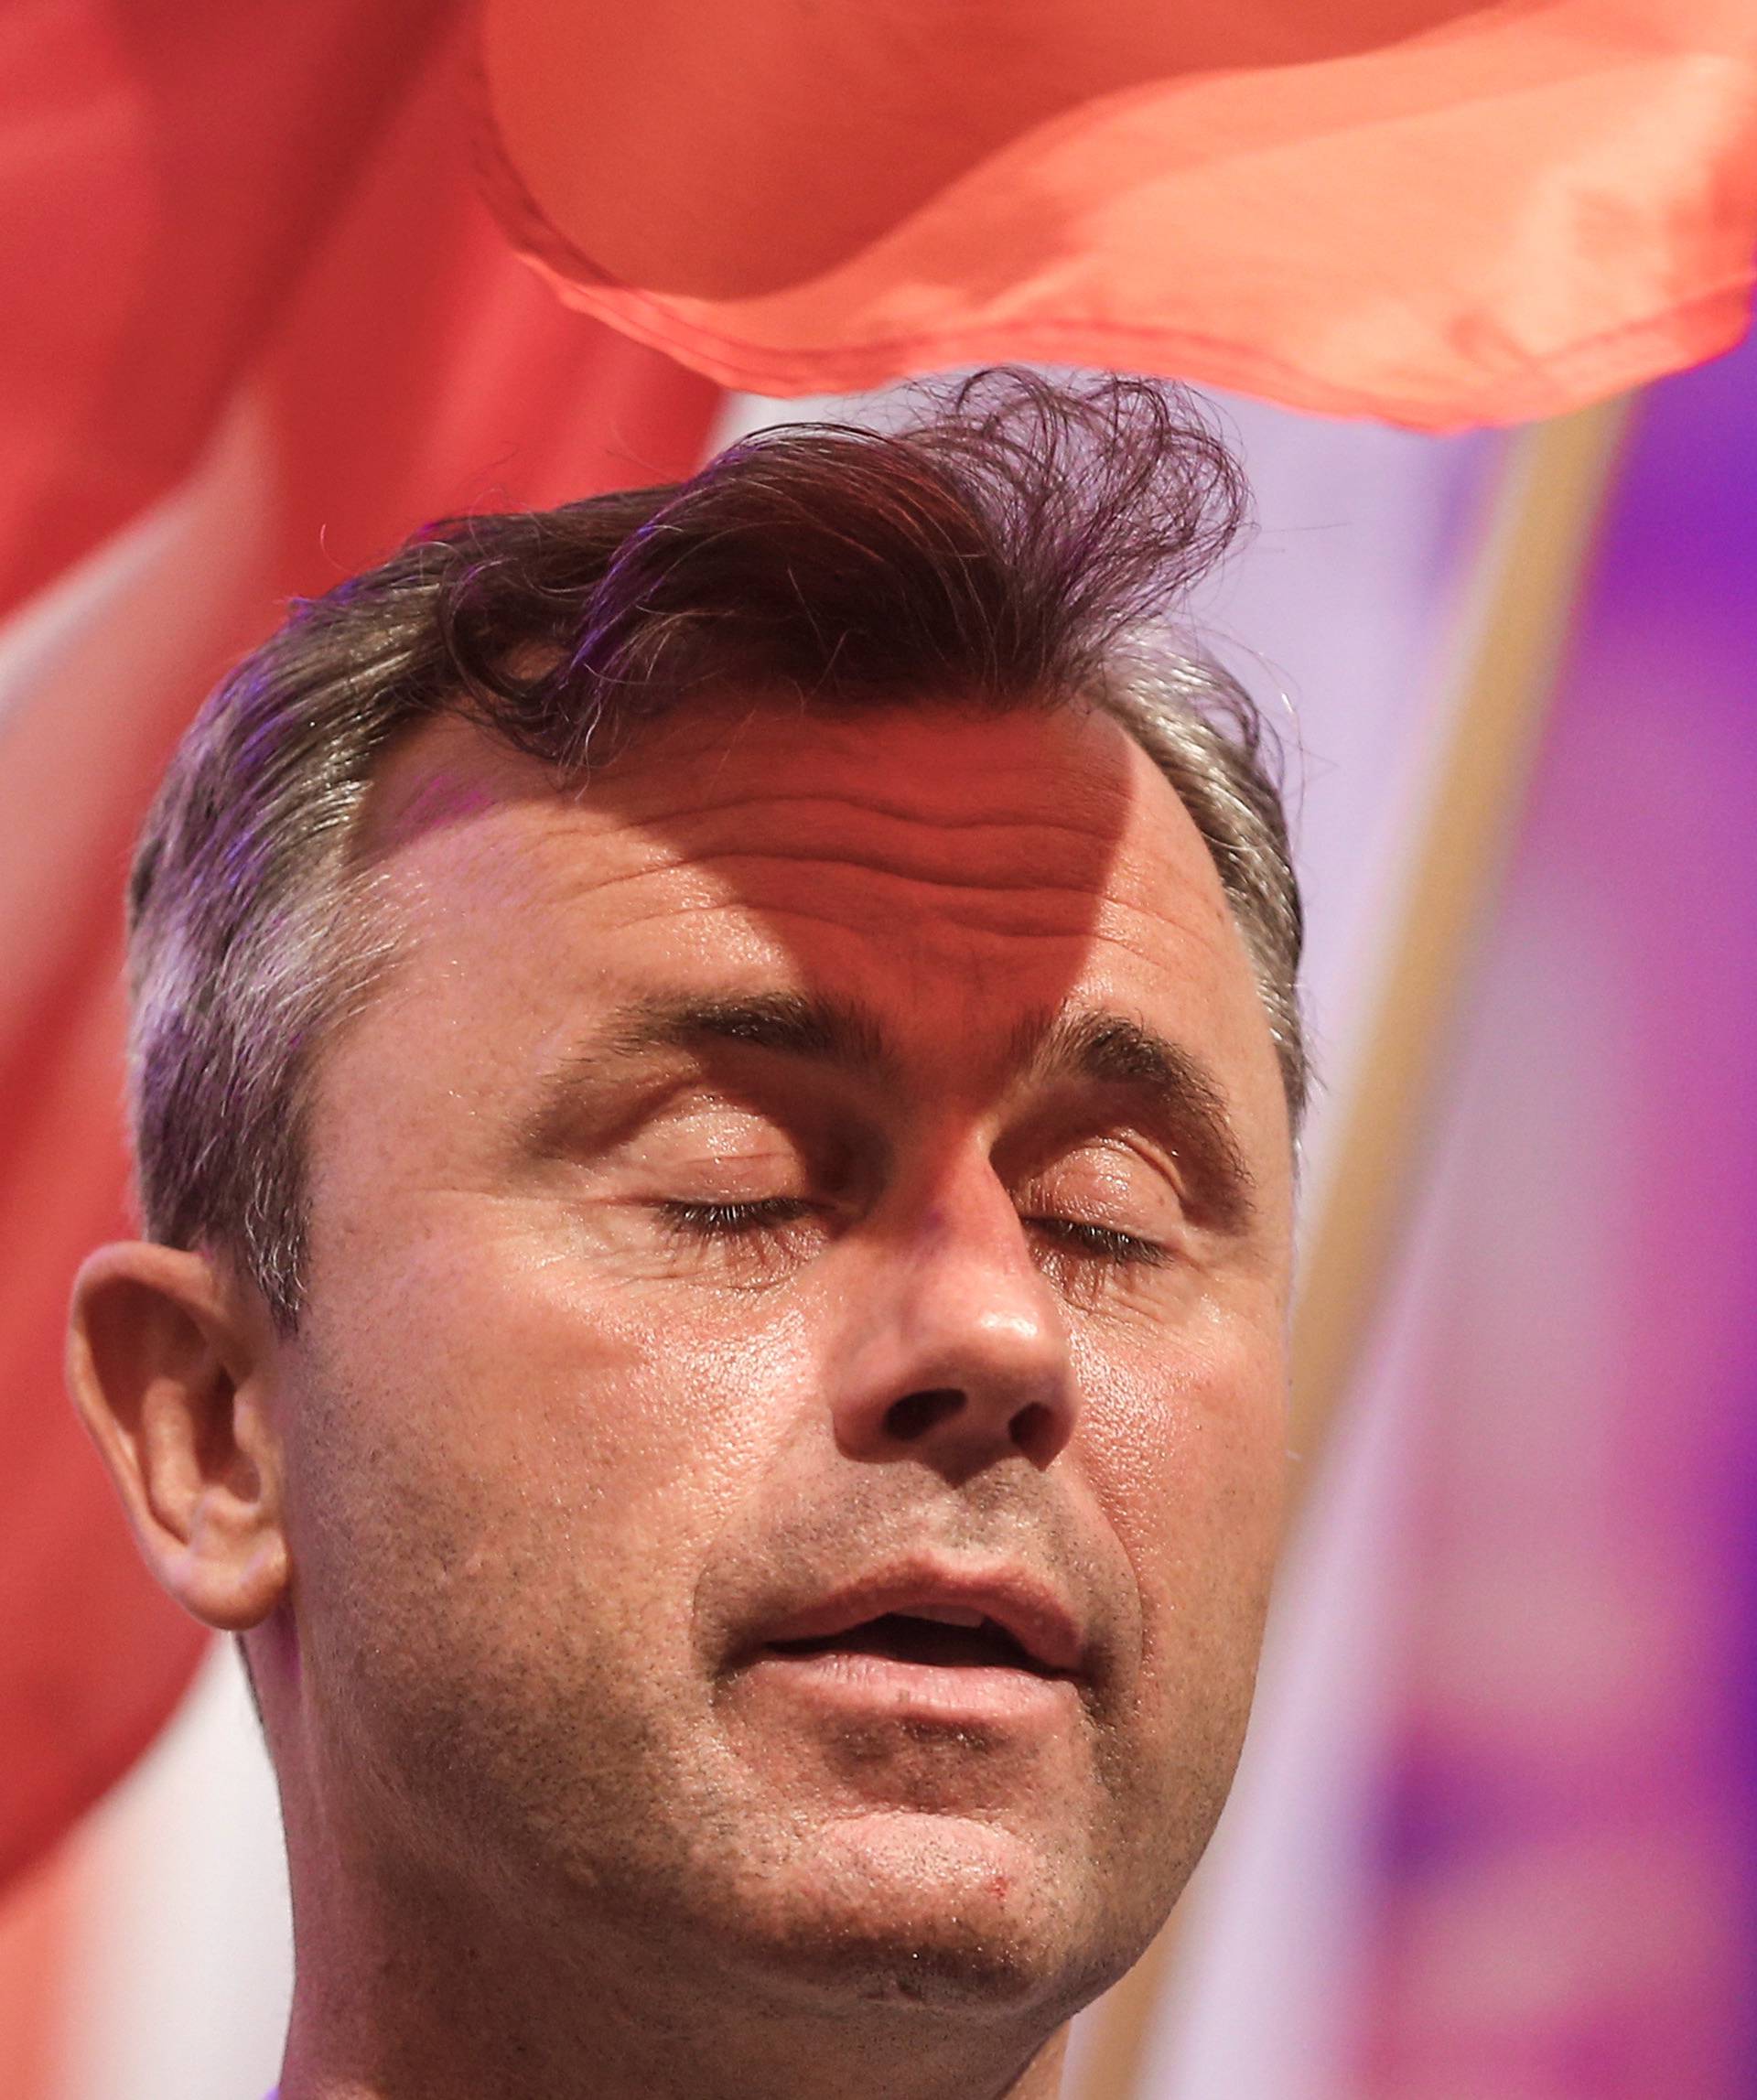 Presidential candidate Norbert Hofer attends a May Day event in Linz